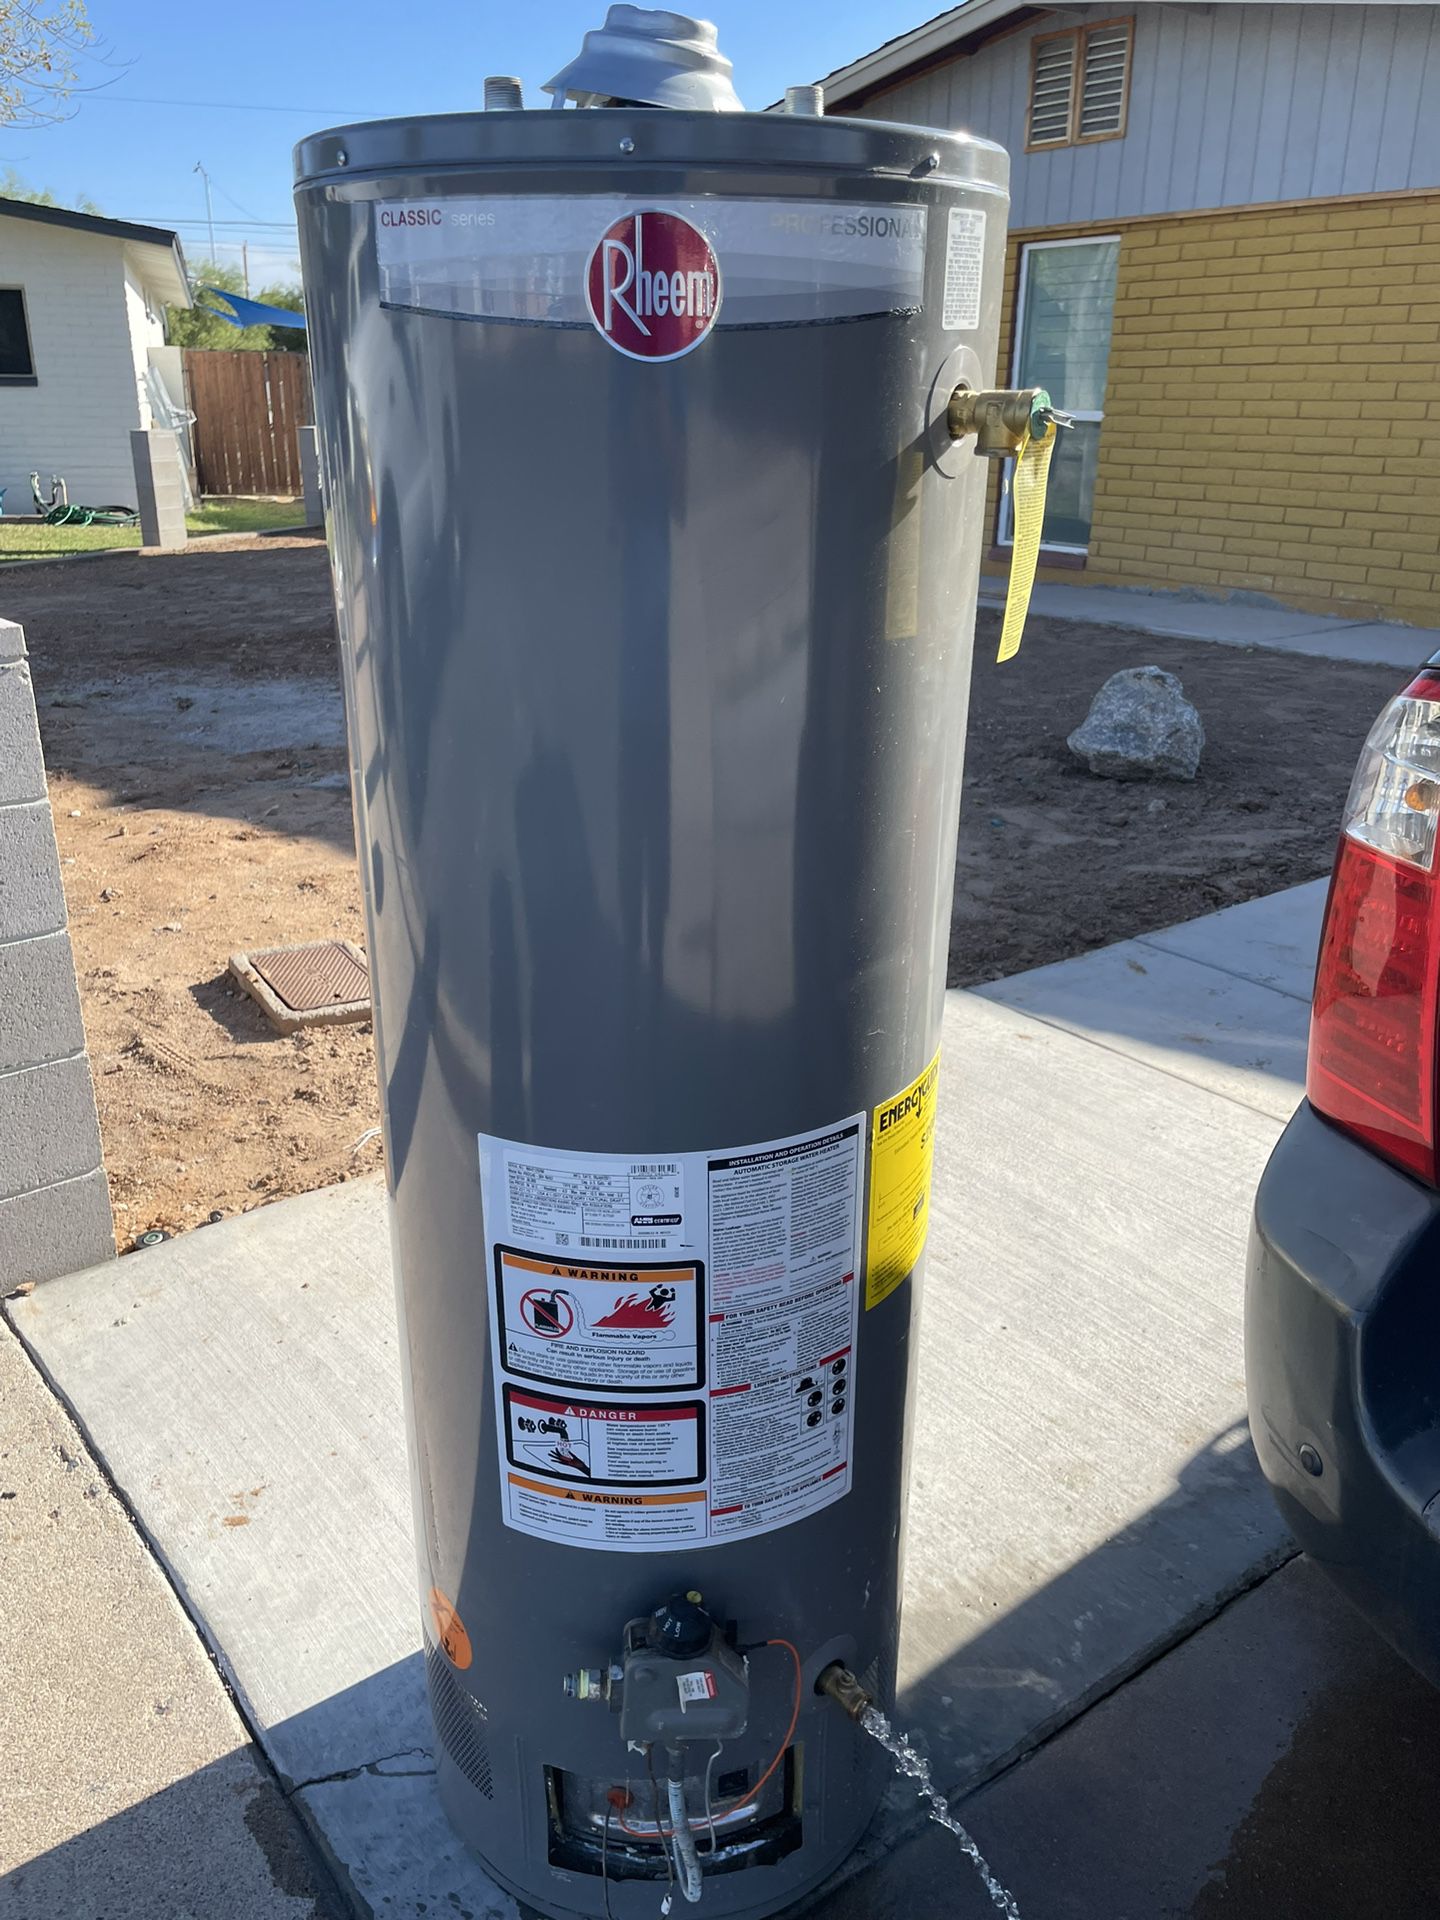 Rheem Performance 40 Gallon Gas Water Heater  Delivered and Installed $440.00